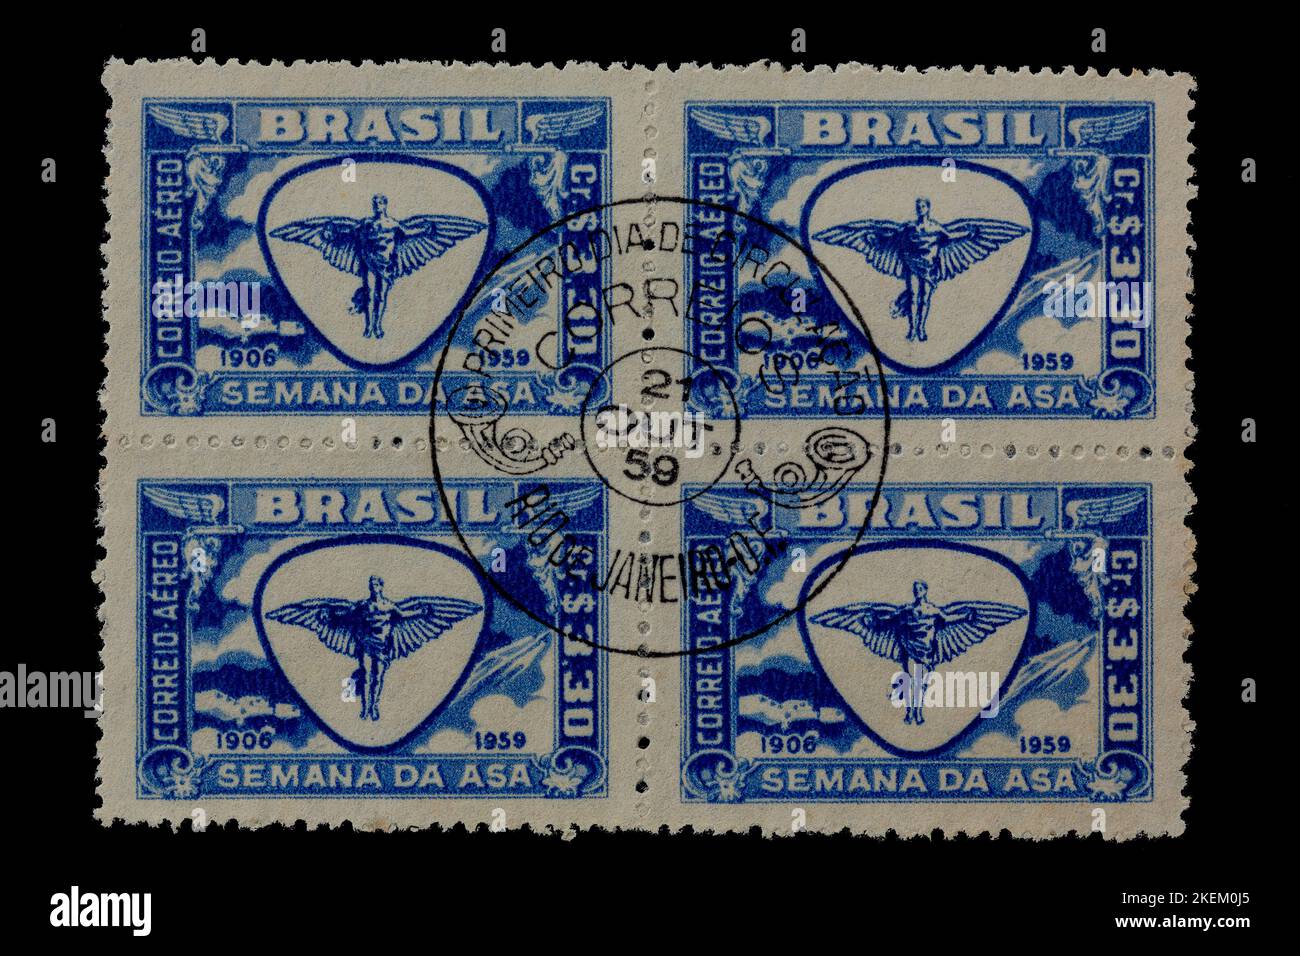 Vintage cancelled postage stamp from Brazil circa 1959. Group of four stamps celebrating wing week. Official postmark entered on the group of four Stock Photo